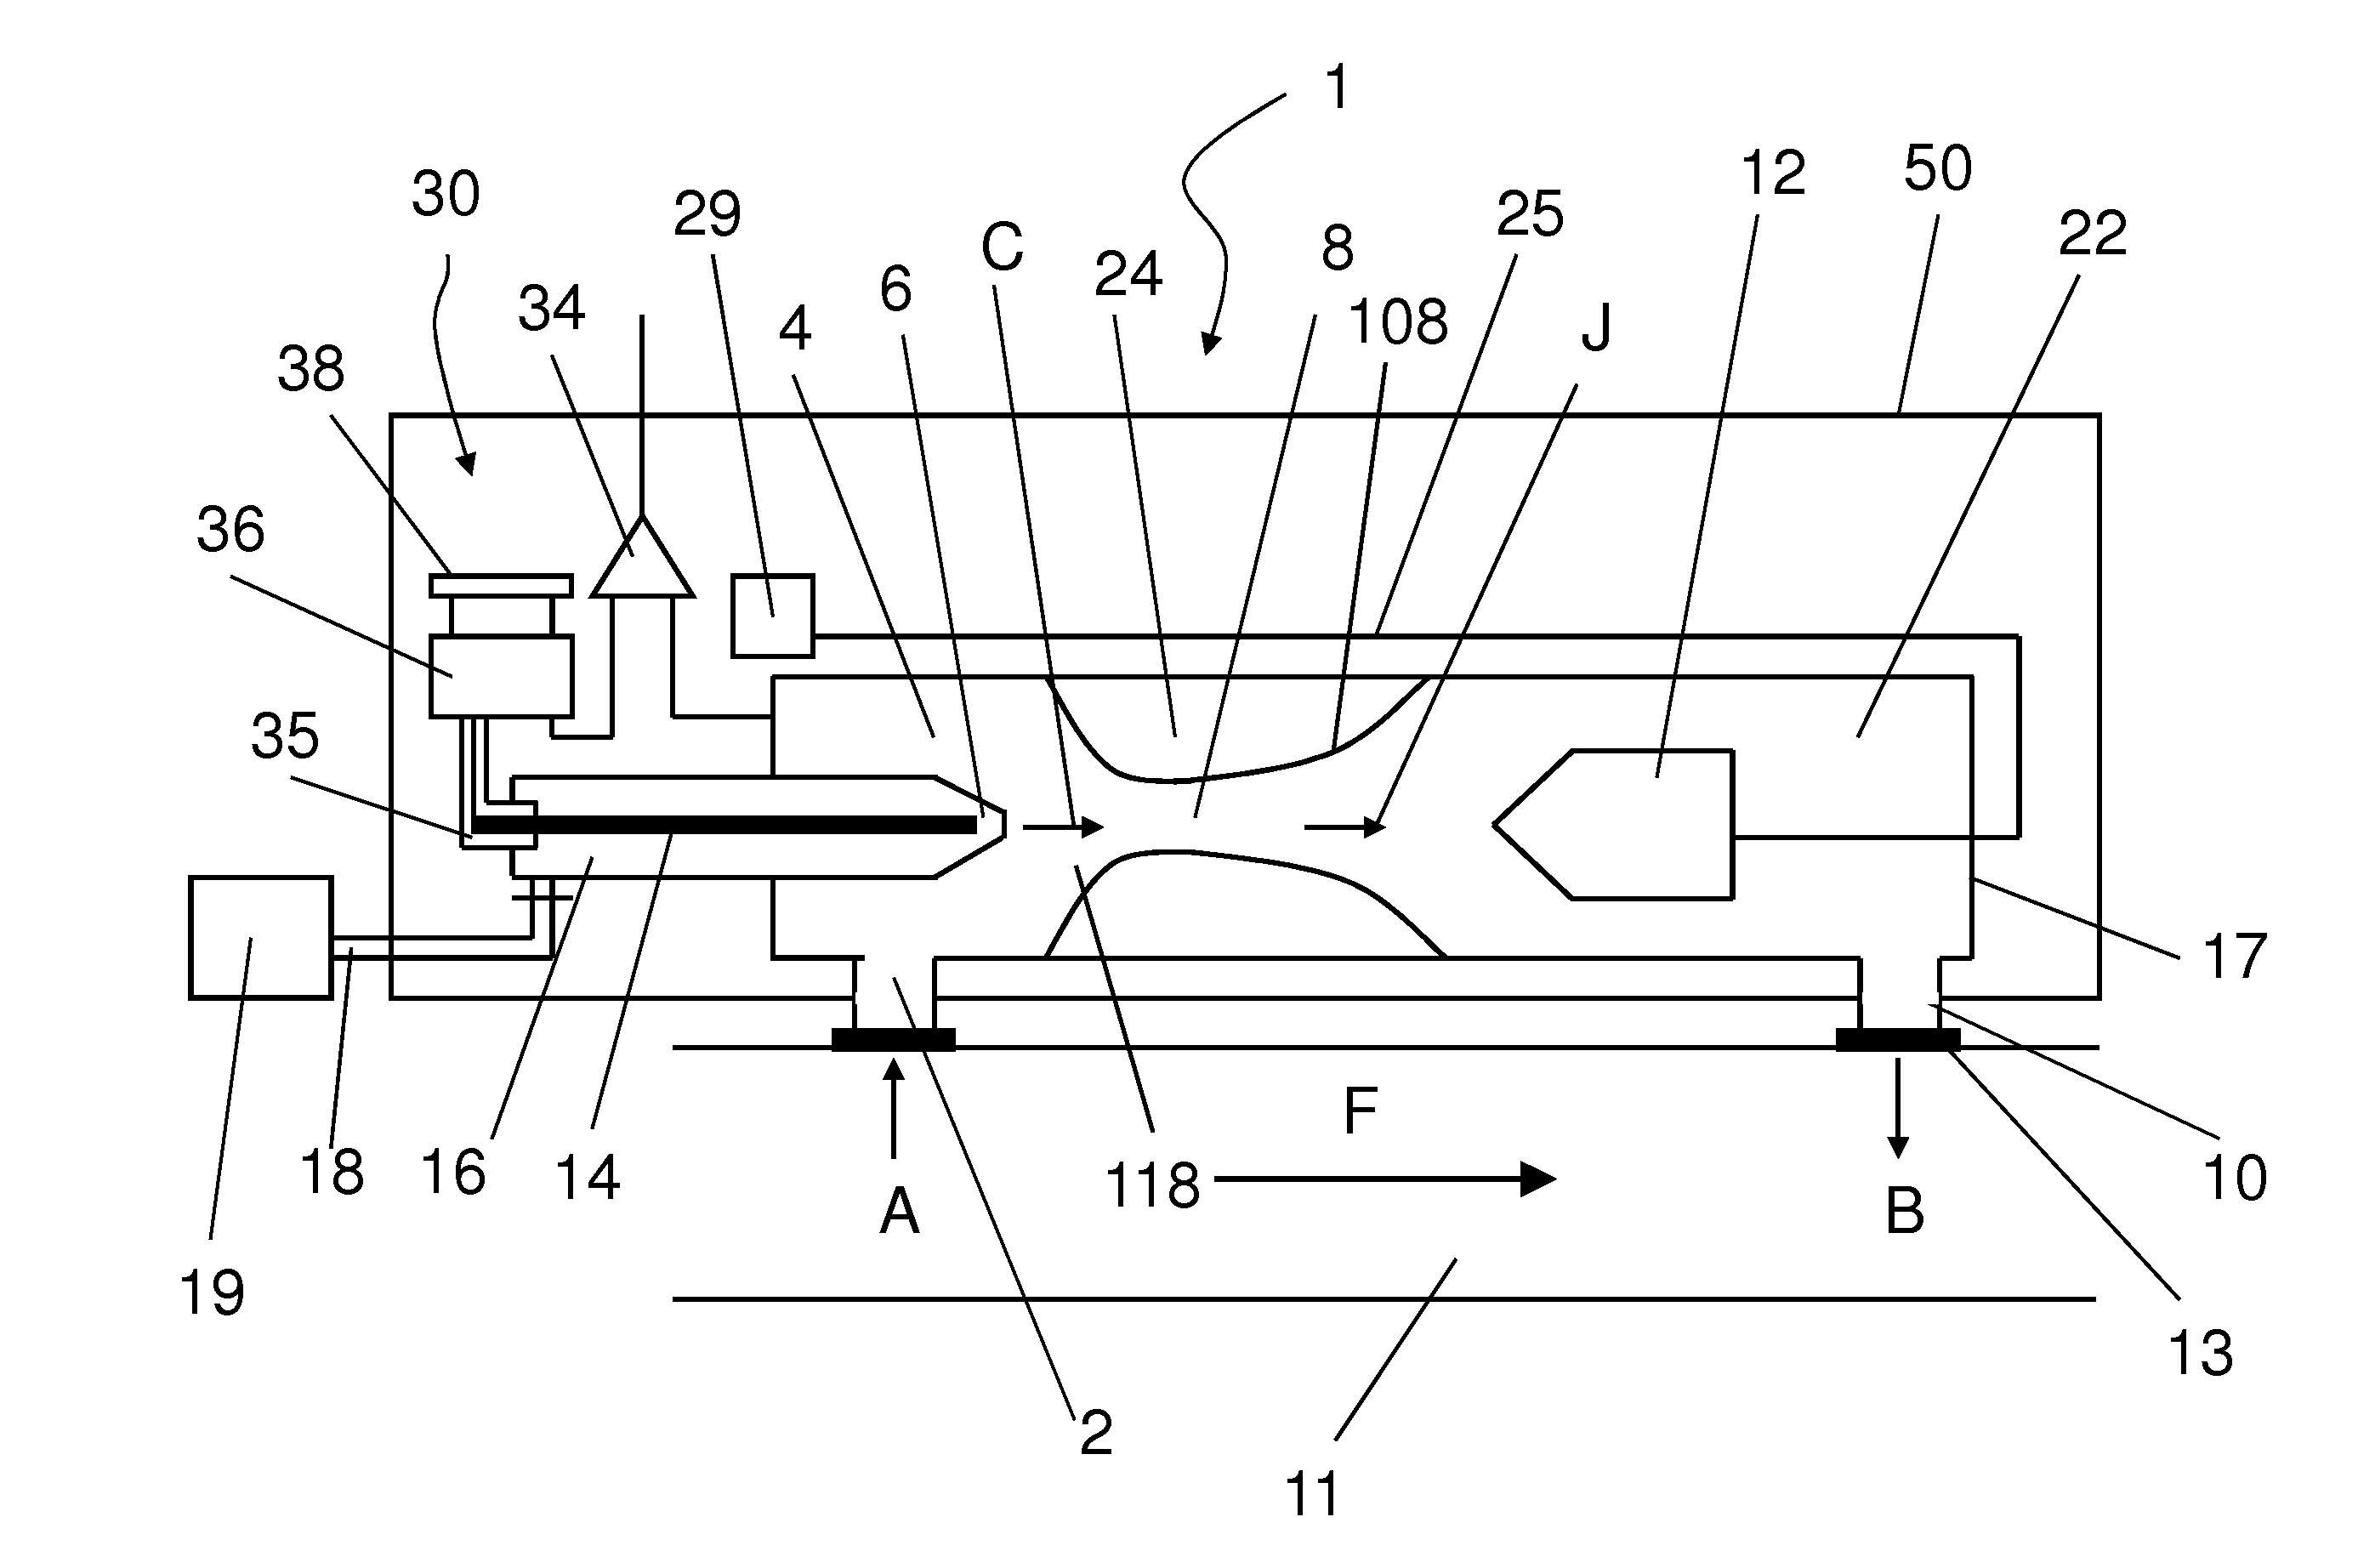 Apparatus for Monitoring Particles in an Aerosol